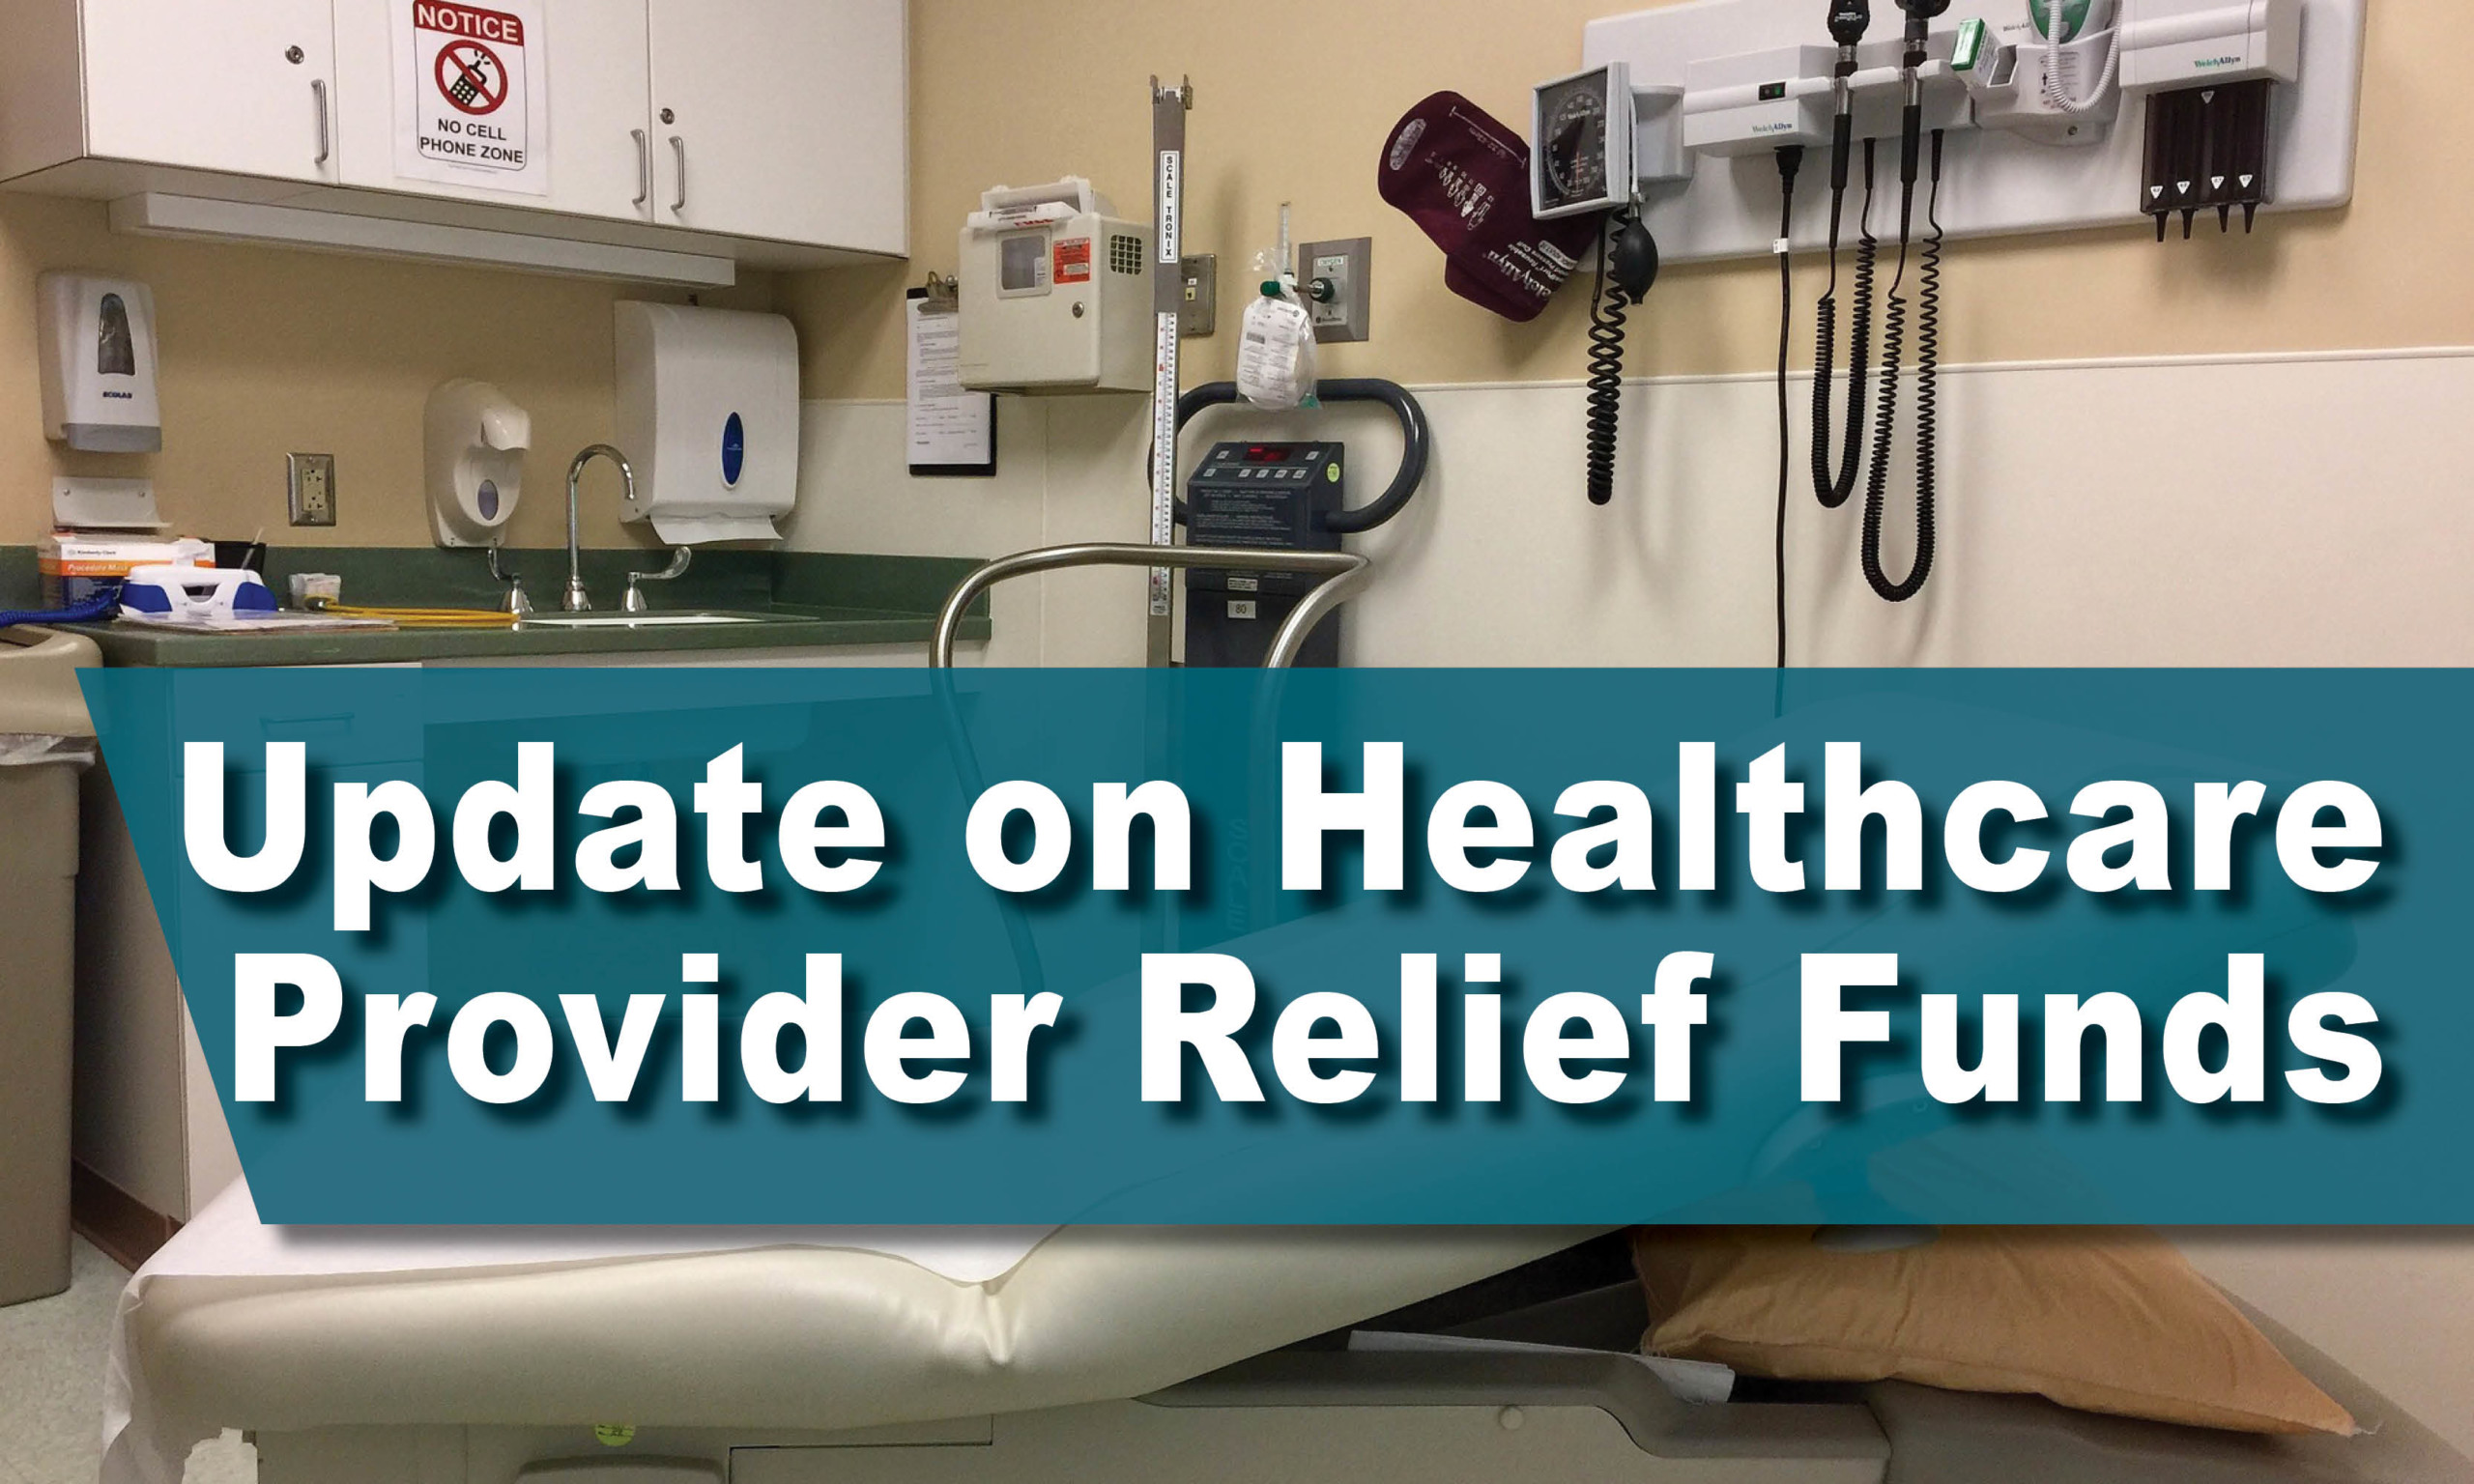 Update on Healthcare Provider Relief Funds